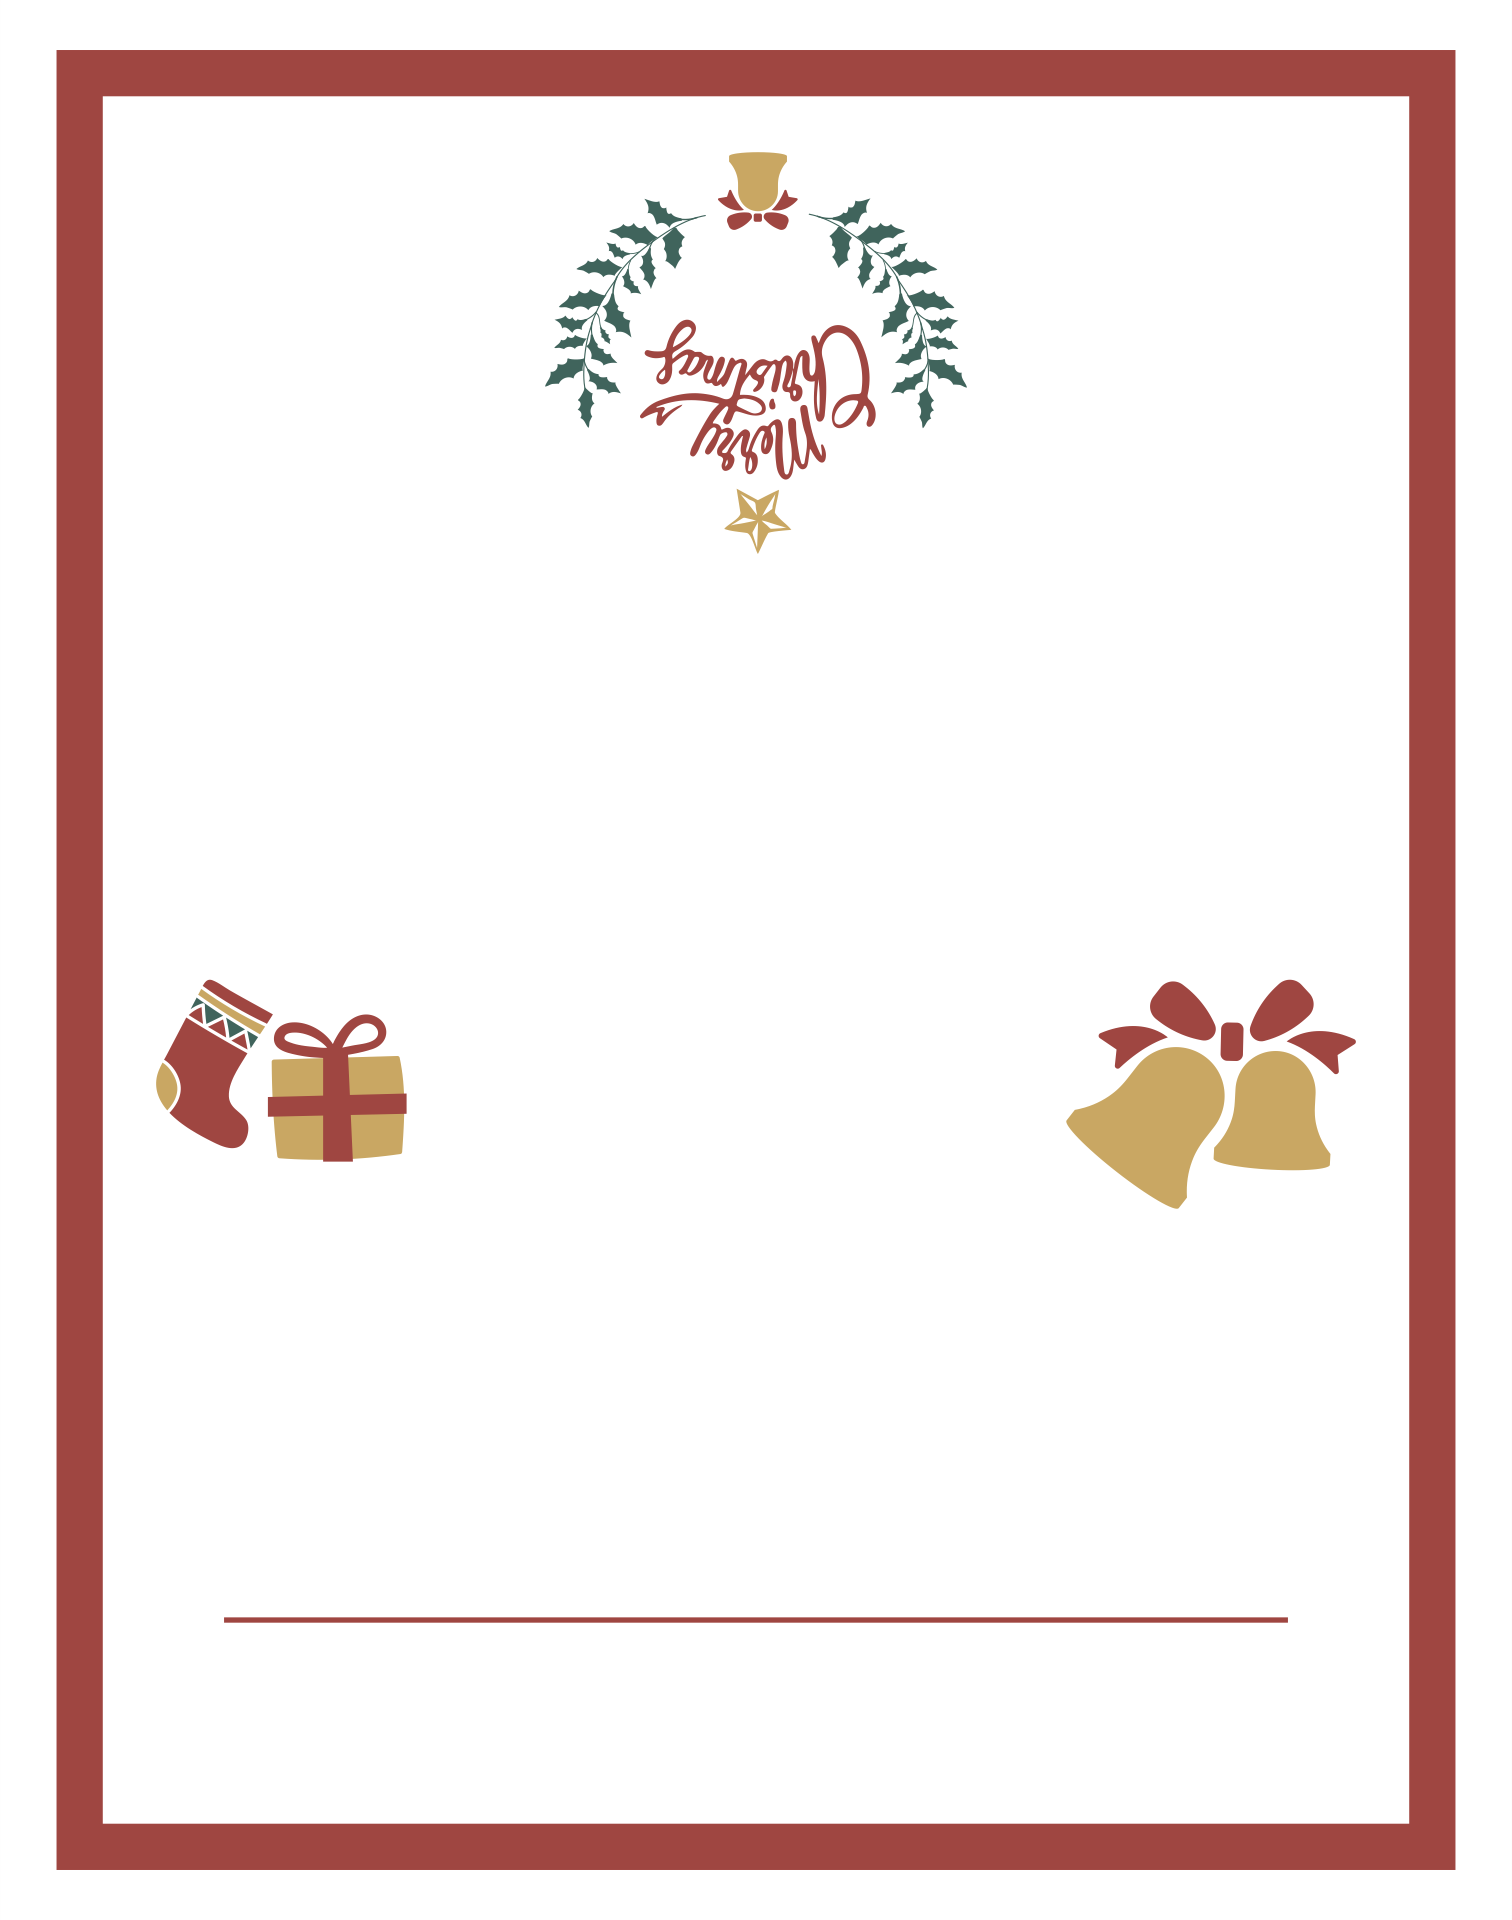 Table Place Settings Digital Download Christmas Place Cards Christmas Food Labels Snowy Place Cards Printable Place Cards for Christmas